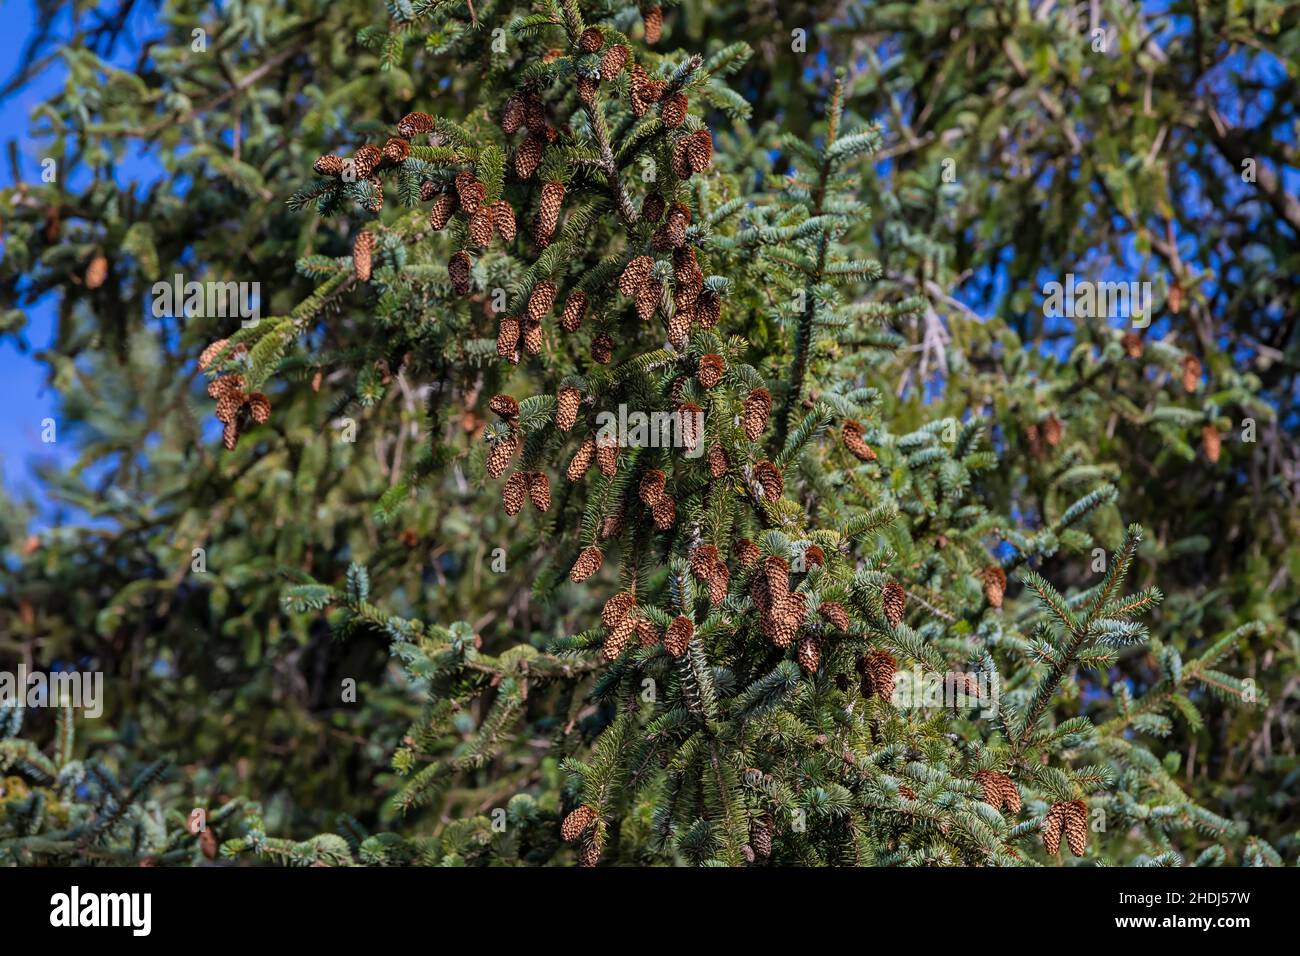 Sitka Spruce, Picea sitchensis, needles and cones at High Bluff Overlook in Redwood National and State Parks, California, USA Stock Photo